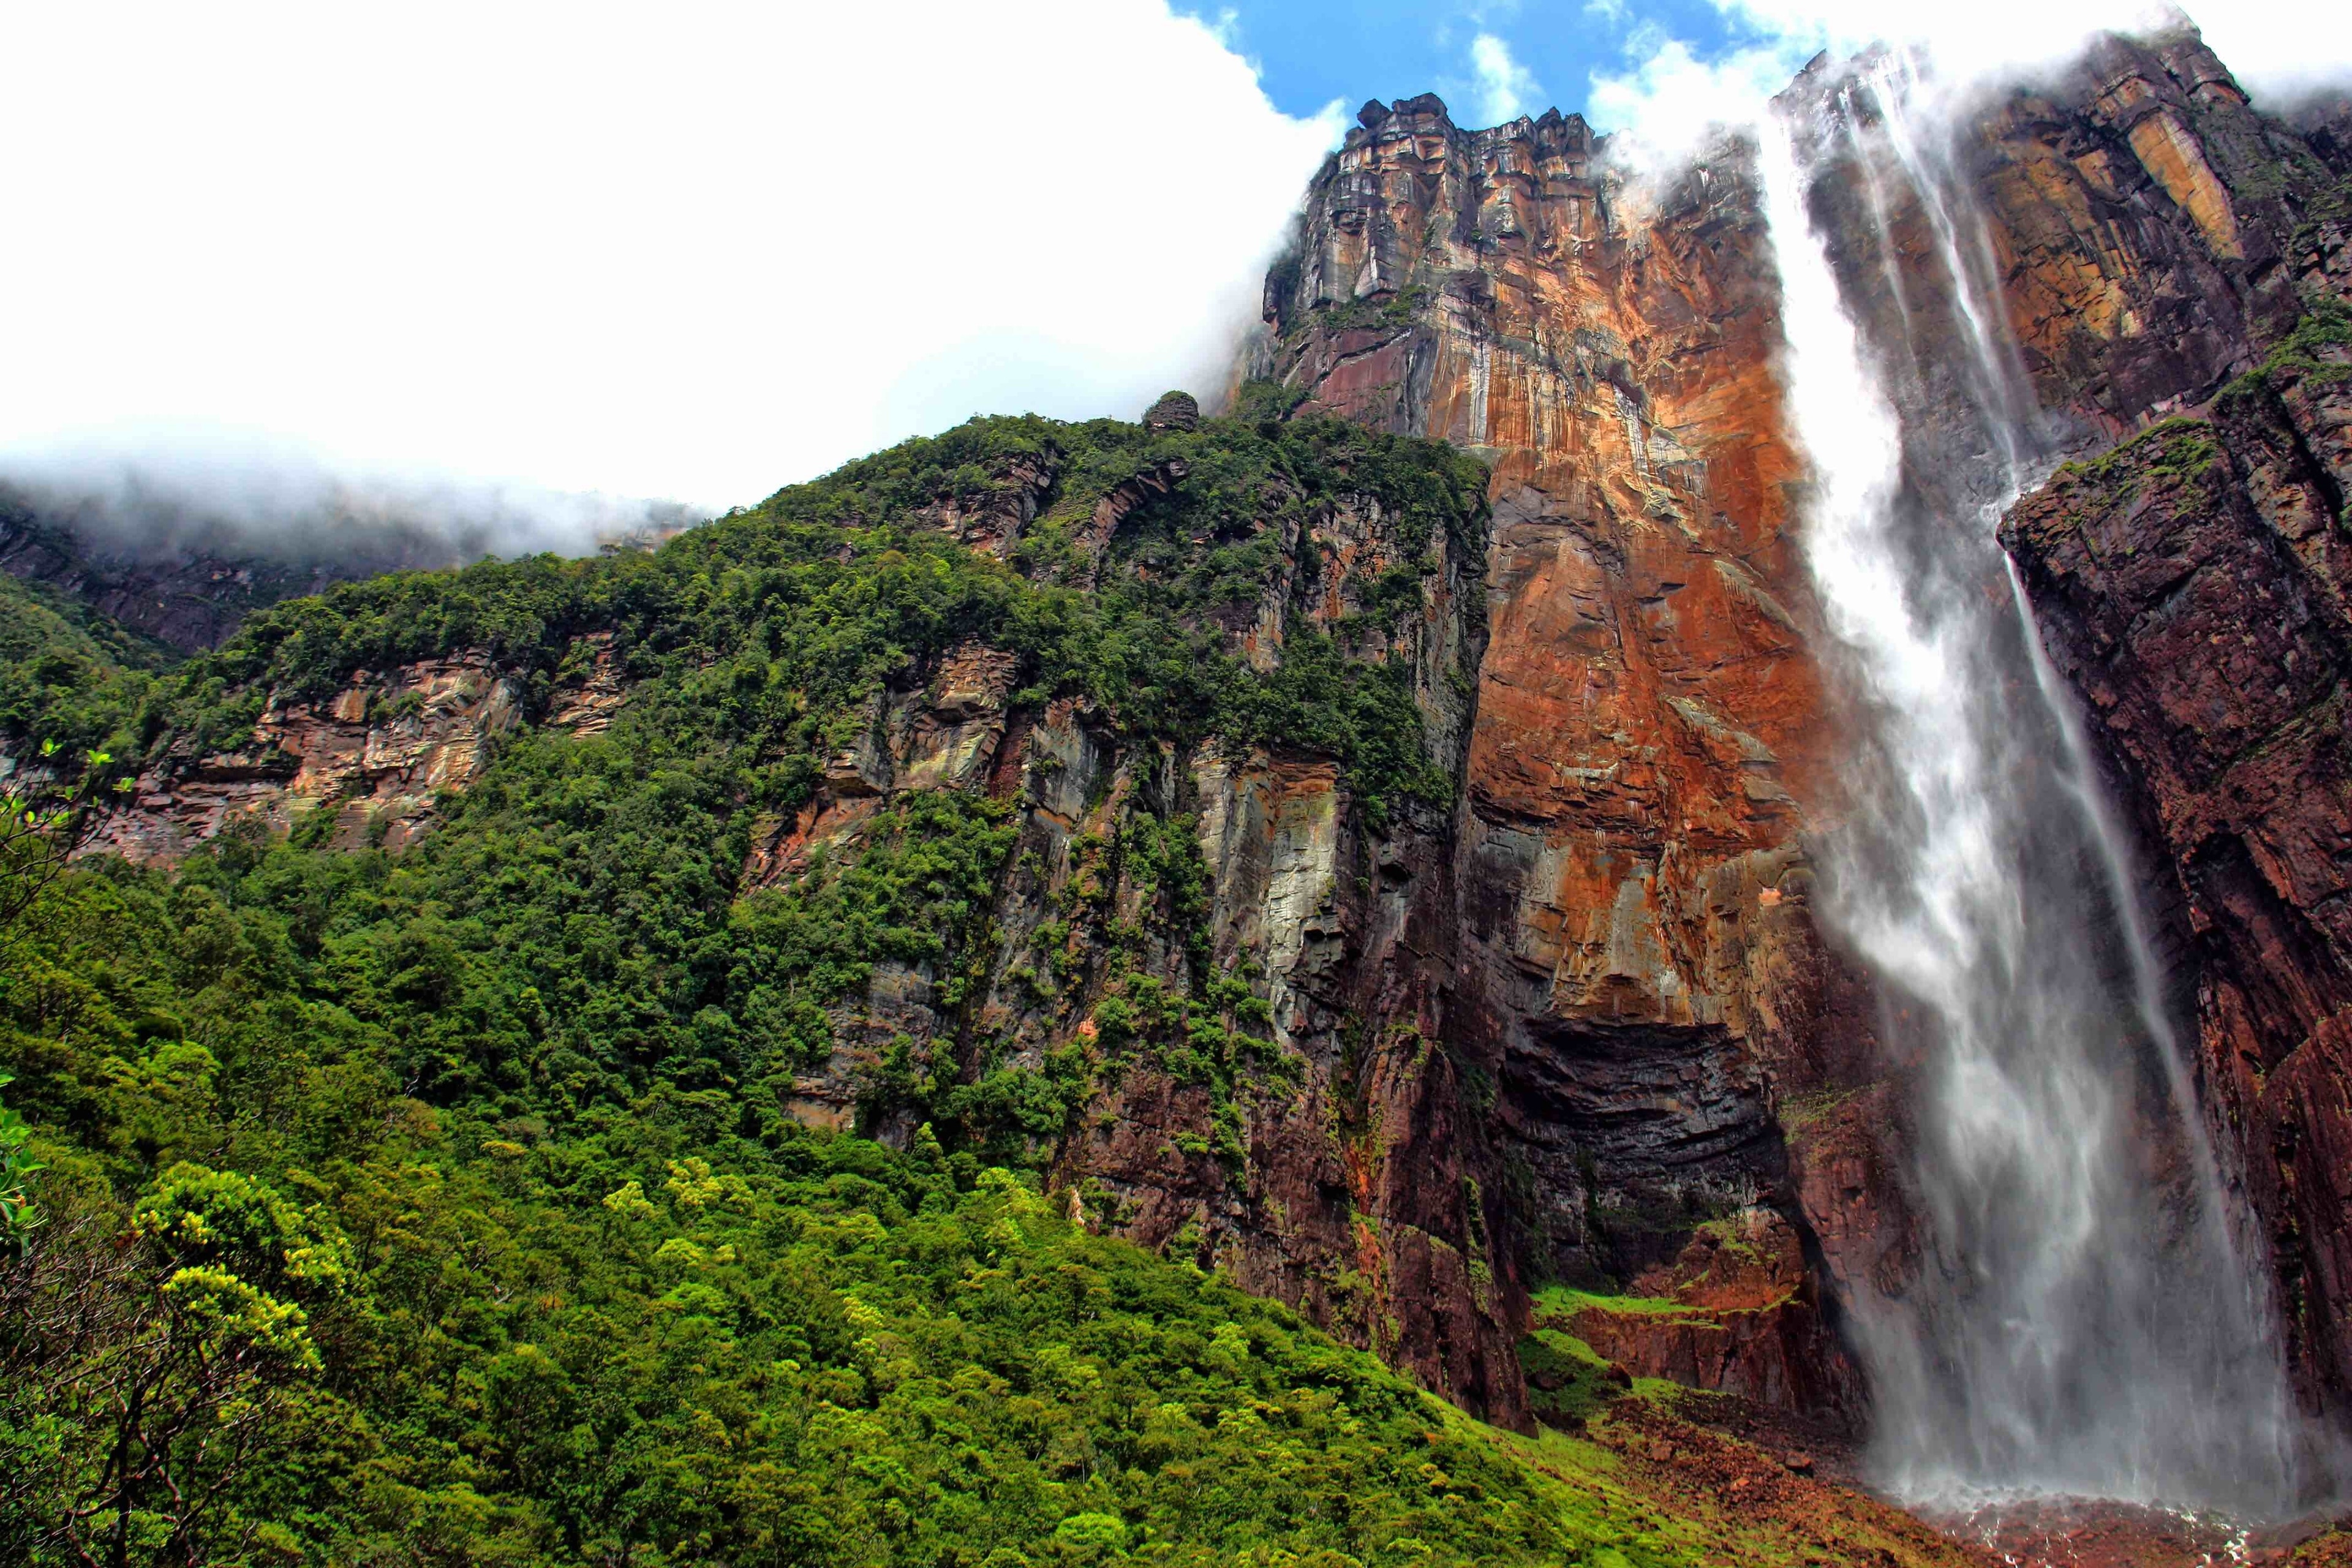 World's tallest waterfall at 979 meters. Angel Falls, Venezuela was on my bucket list and luck had it that I would be in the country for business a few years ago. On a weekend off, I made my way to Canaima park (only way to get there is by air) and then took a 3 hour boat ride up the Churun River in a motorized dugout boat to the trail up to the falls. The views along the way were pretty cool and like a completely different world. Well worth the trip on its own. At our destination we were dropped off and hiked up through the jungle on a well used trail for a few kilometers before arriving at the pools near the base of the falls. Looking up you can appreciate the drop. The water turned to mist on way down and then pooled over several other small falls on their way down to the river. The pools were the perfect place to have a swim and relax while taking in the views of the tepui and surrounding landscape. The locals said it was good luck to drink the water from the falls. It was nice and cool and tasted as pure as any bottled water. I guess the luck was with me as it did not rain until we were almost back at the camp in Canaima. Then the skies opened up and it poured for hours. I would love to visit again and hopefully the political situation in Venezuela becomes more stable so that others may be able to enjoy this amazing place.